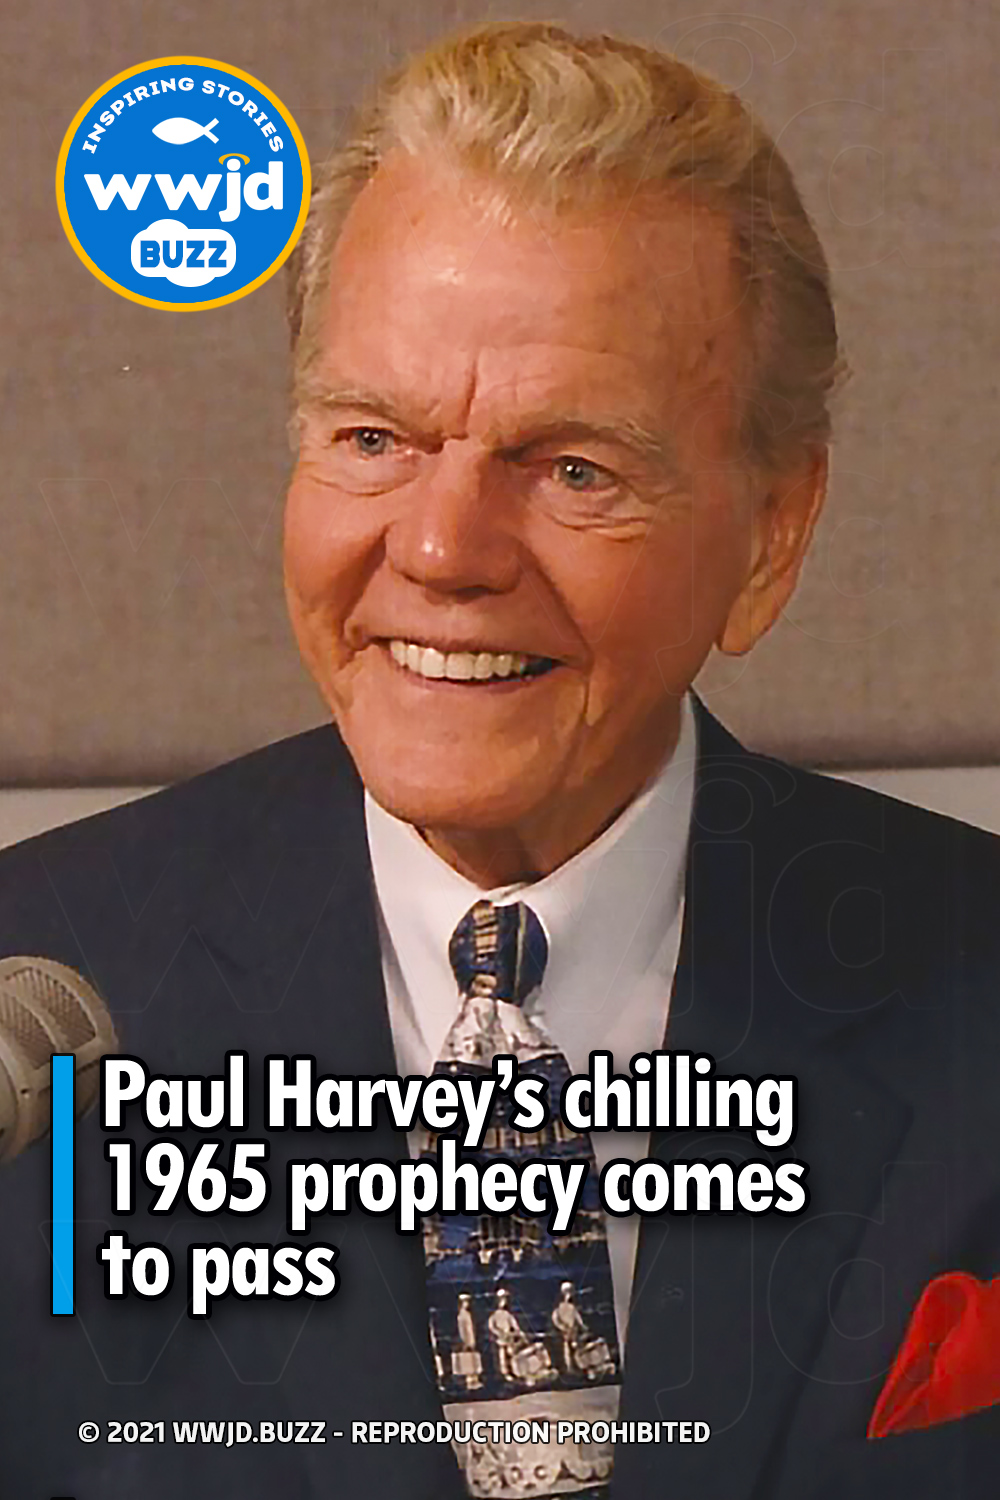 Paul Harvey’s chilling 1965 prophecy comes to pass